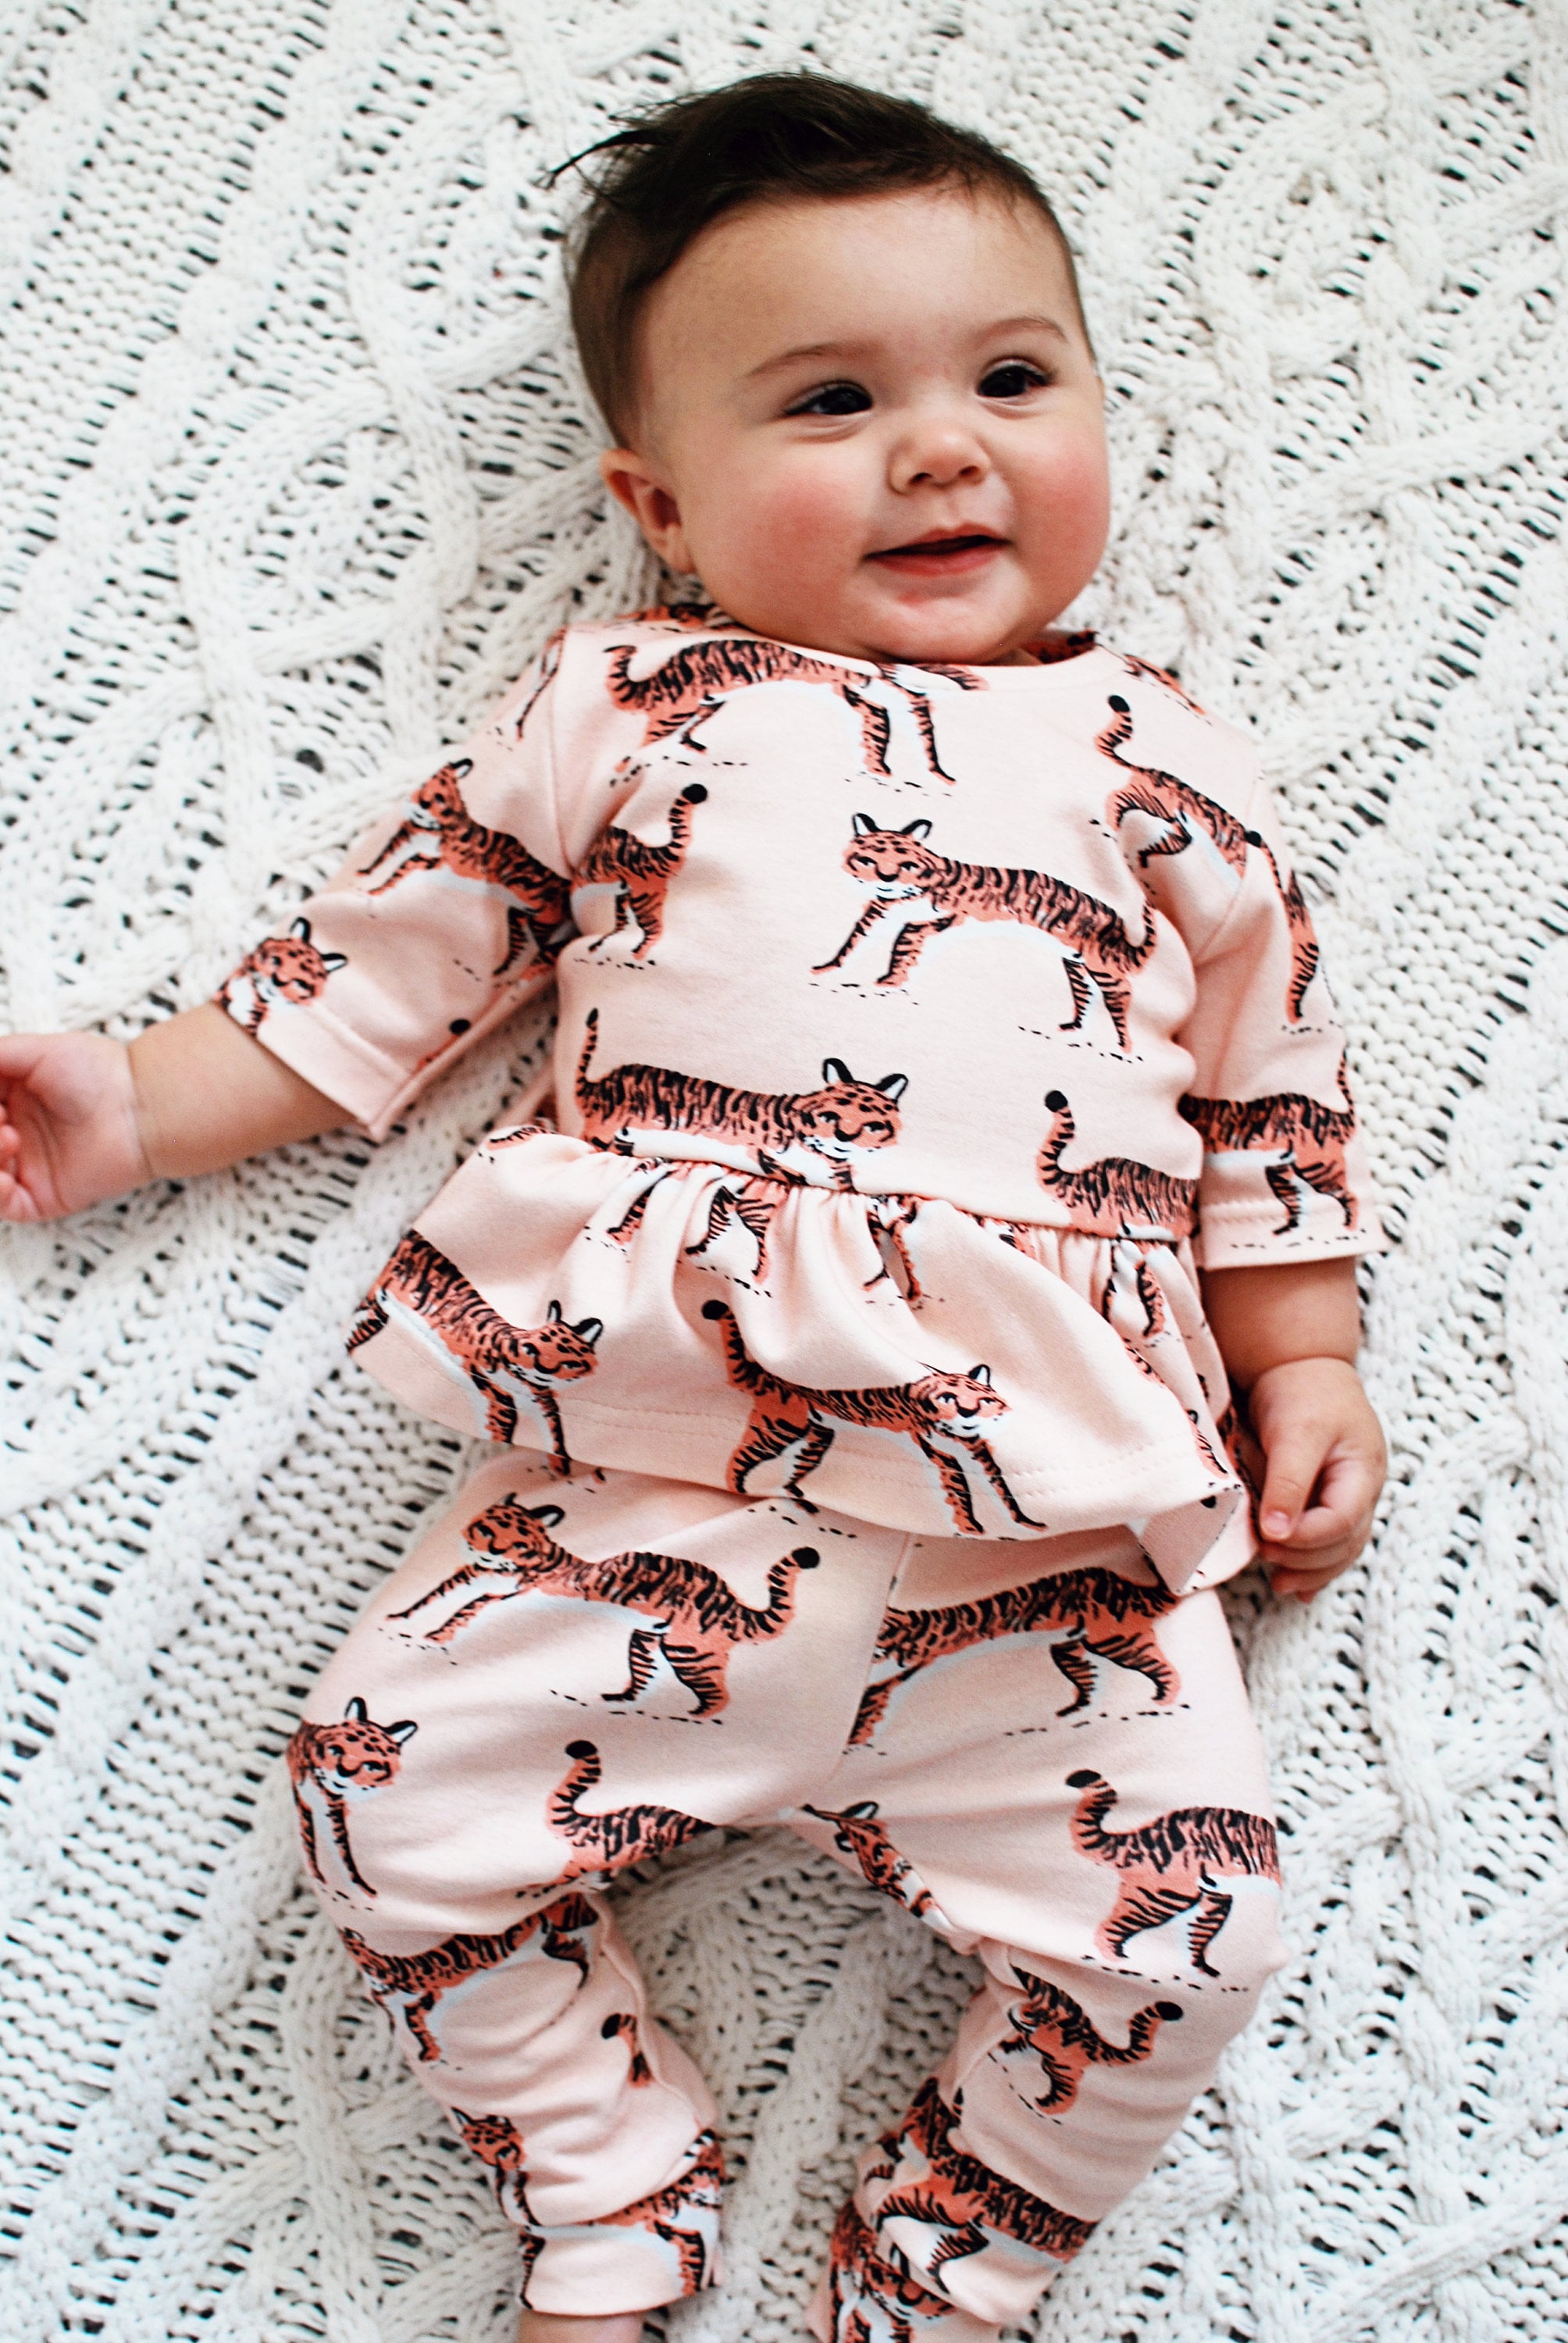 Tiger Baby Leggings Organic Baby Clothes Tiger Print Leggings Baby Joggers Baby Boy Gift Going Home Outfit Tiger Birthday Leggings Kleding Jongenskleding Babykleding voor jongens Broeken Tigers 